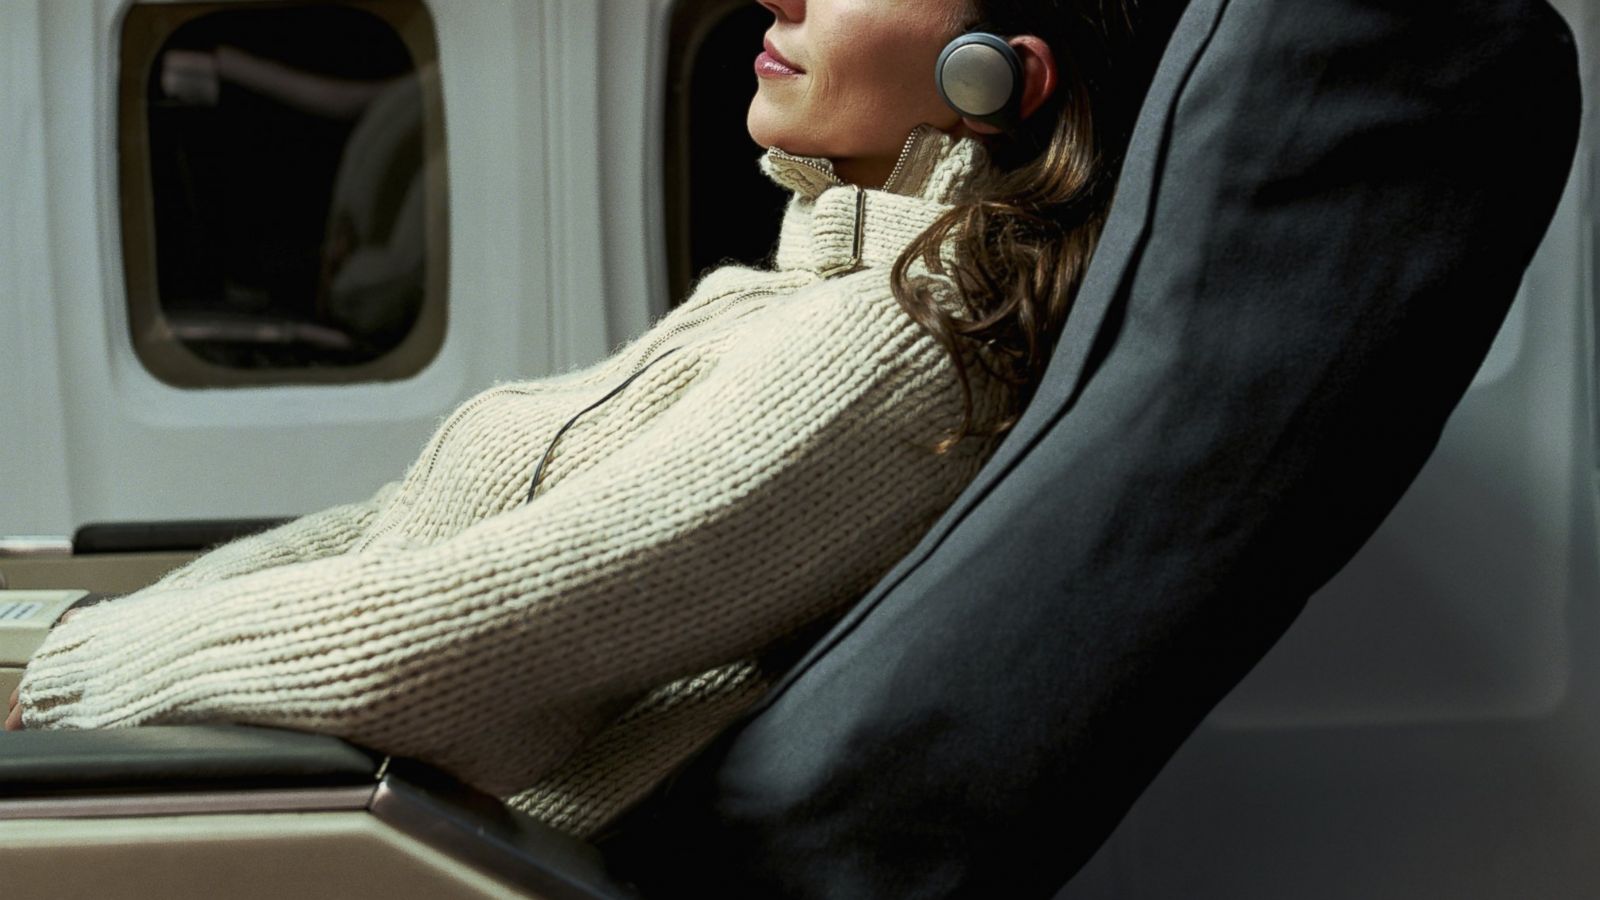 The Do's and Don'ts of Reclining Your Airplane Seat - ABC News